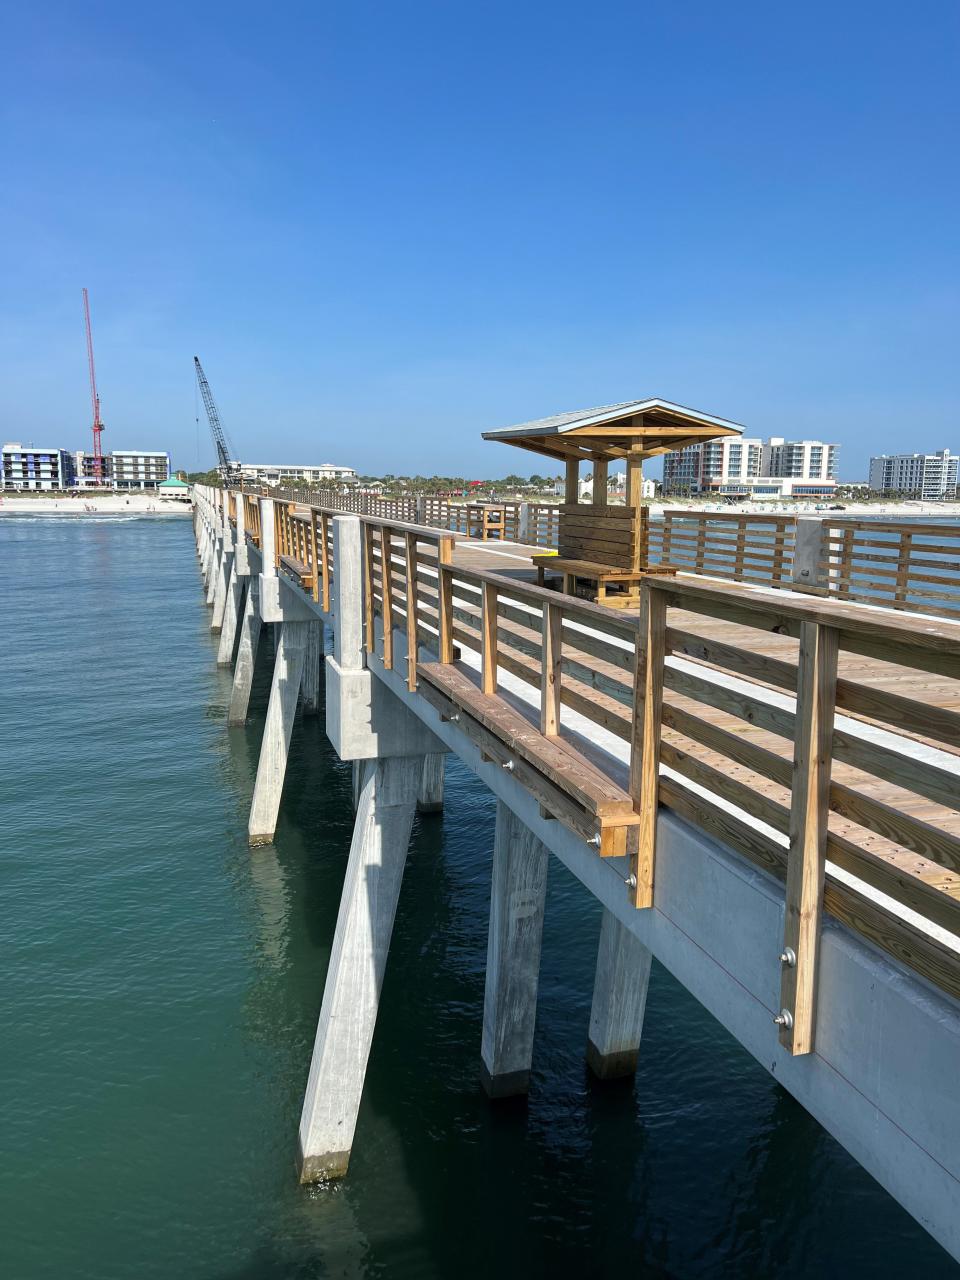 The new pier is angled slightly higher with stronger beams